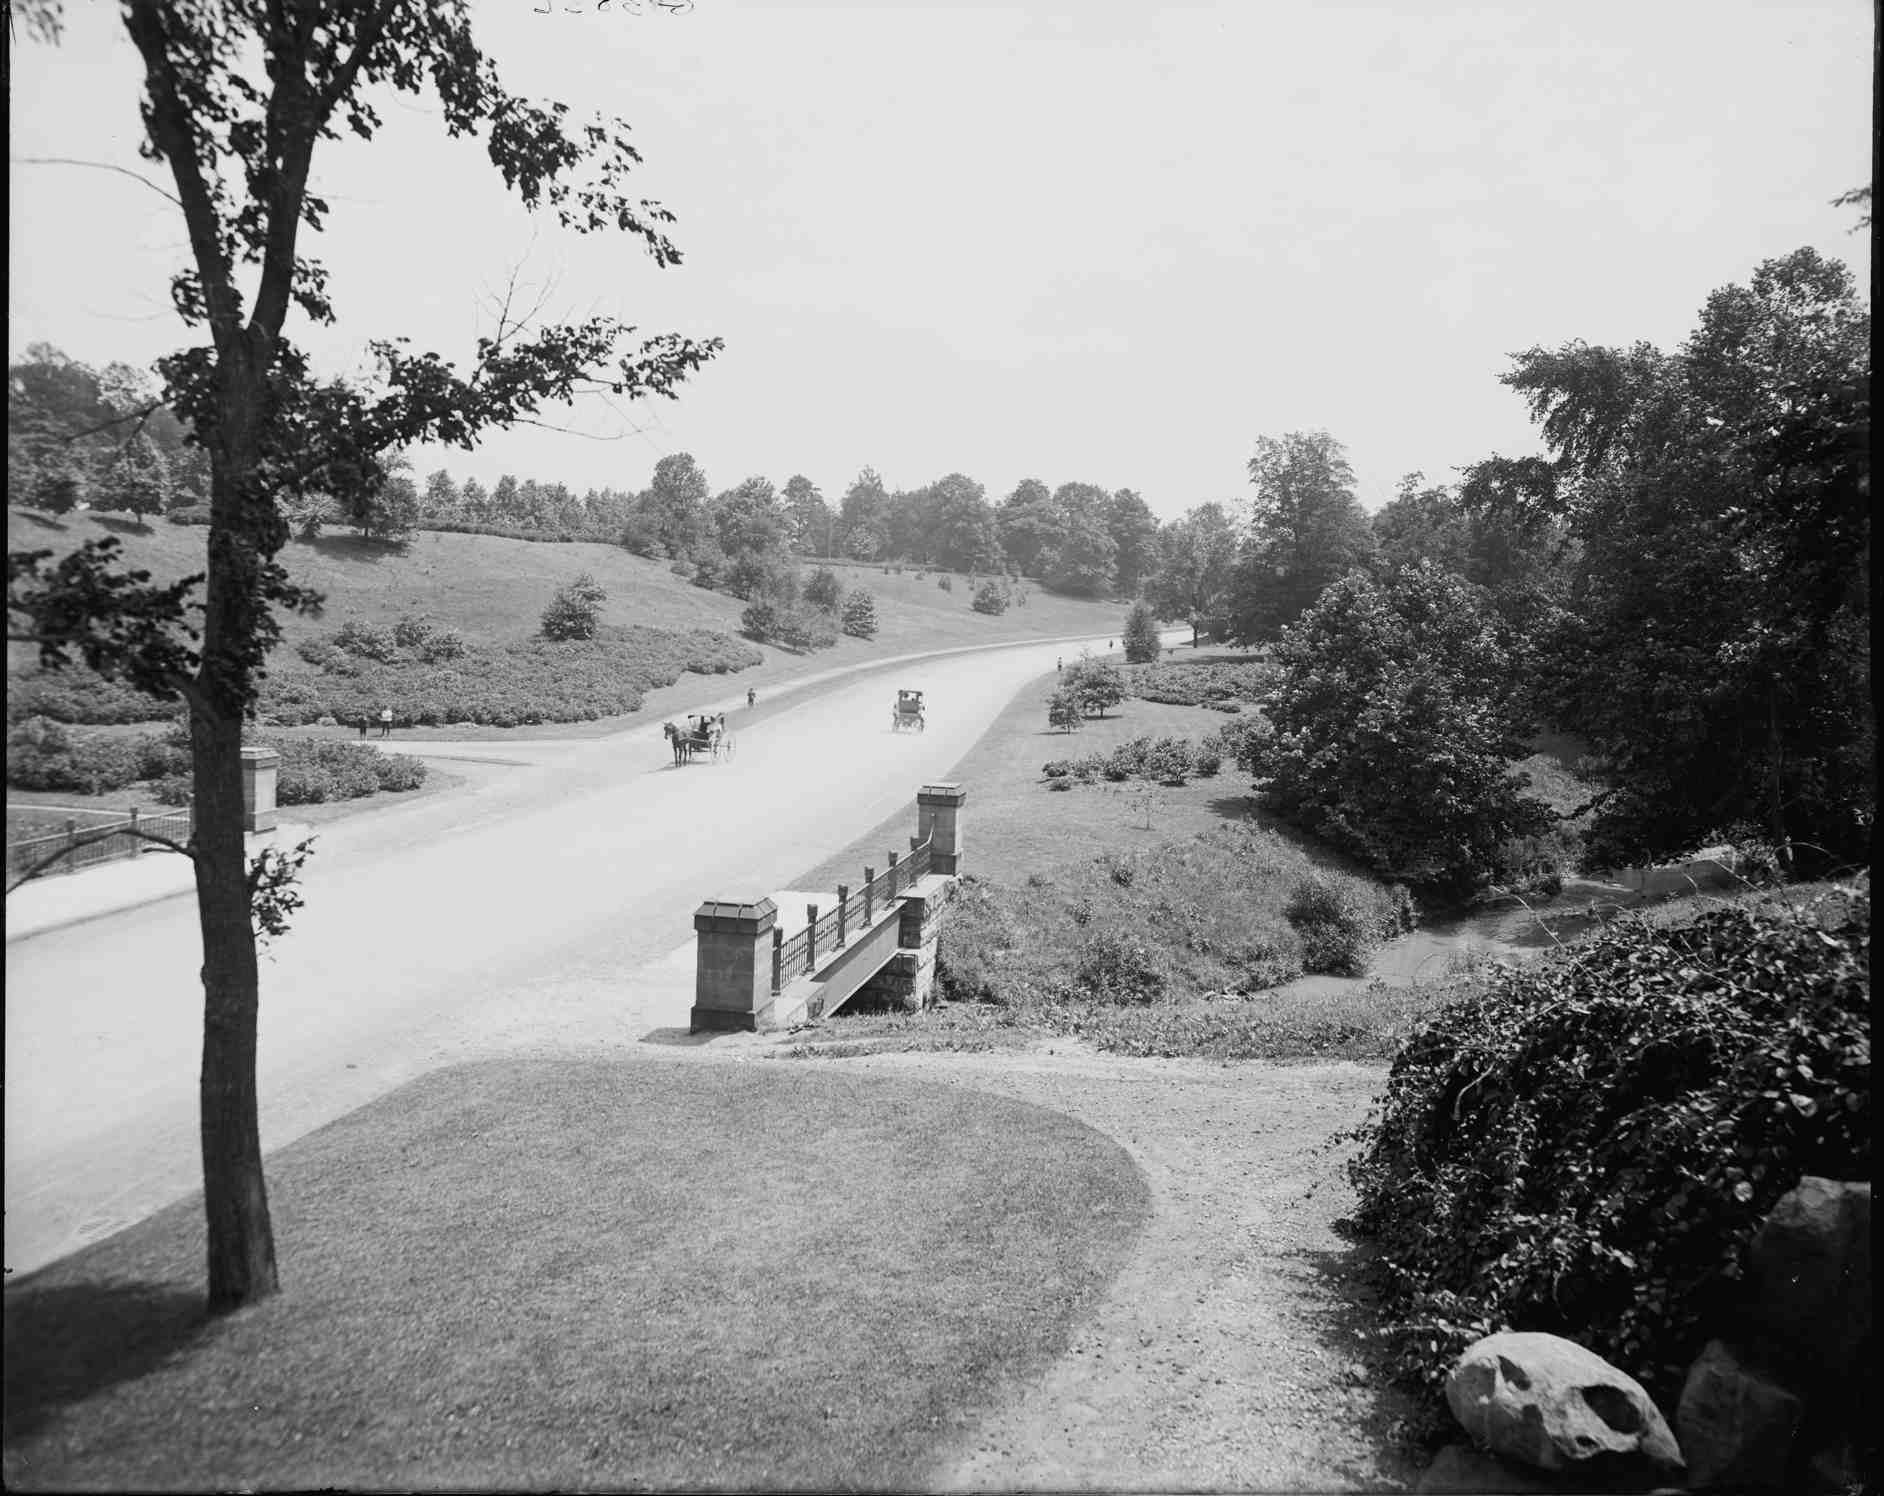 A black and white photo of a road in a park.